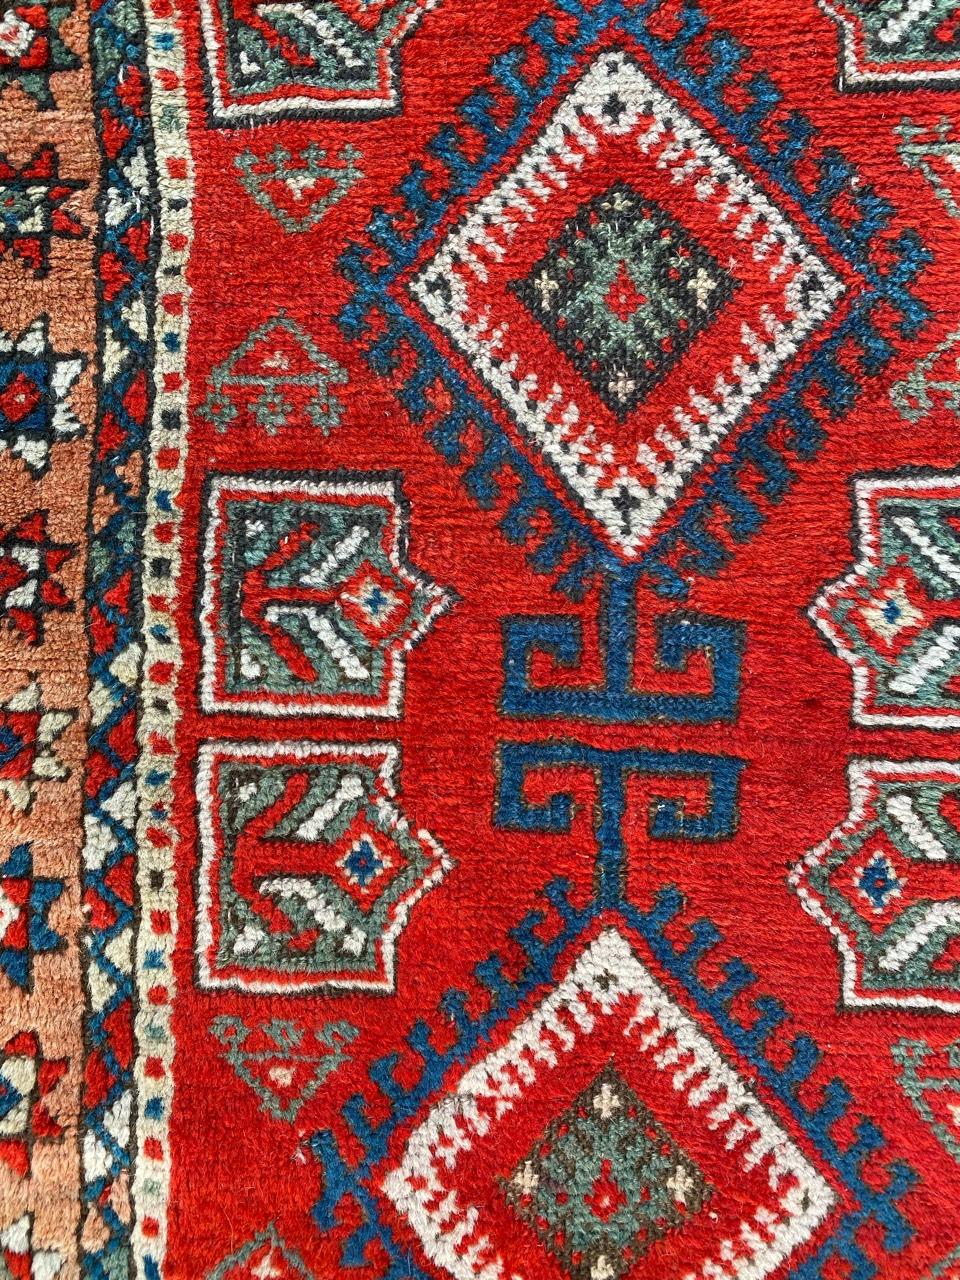 Nice early 20th century Turkish rug with a tribal geometrical design and nice colors with red, blue, orange and green, entirely hand knotted with wool velvet on wool foundation.